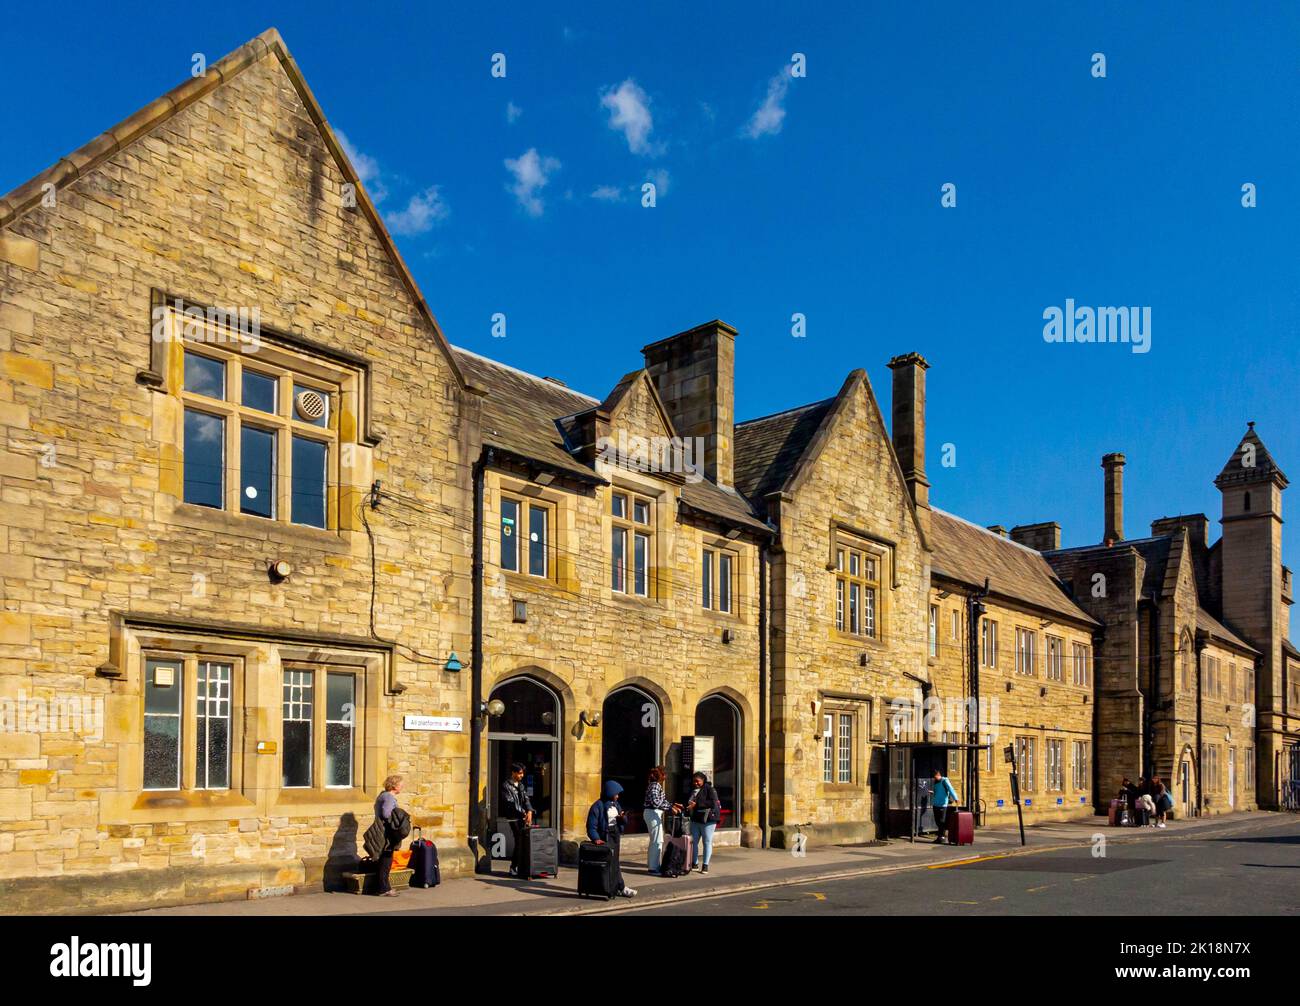 Exterior of Lancaster Railway Station in Lancashire England UK originally opened in 1846 and designed by William Tite using sandstone bricks. Stock Photo